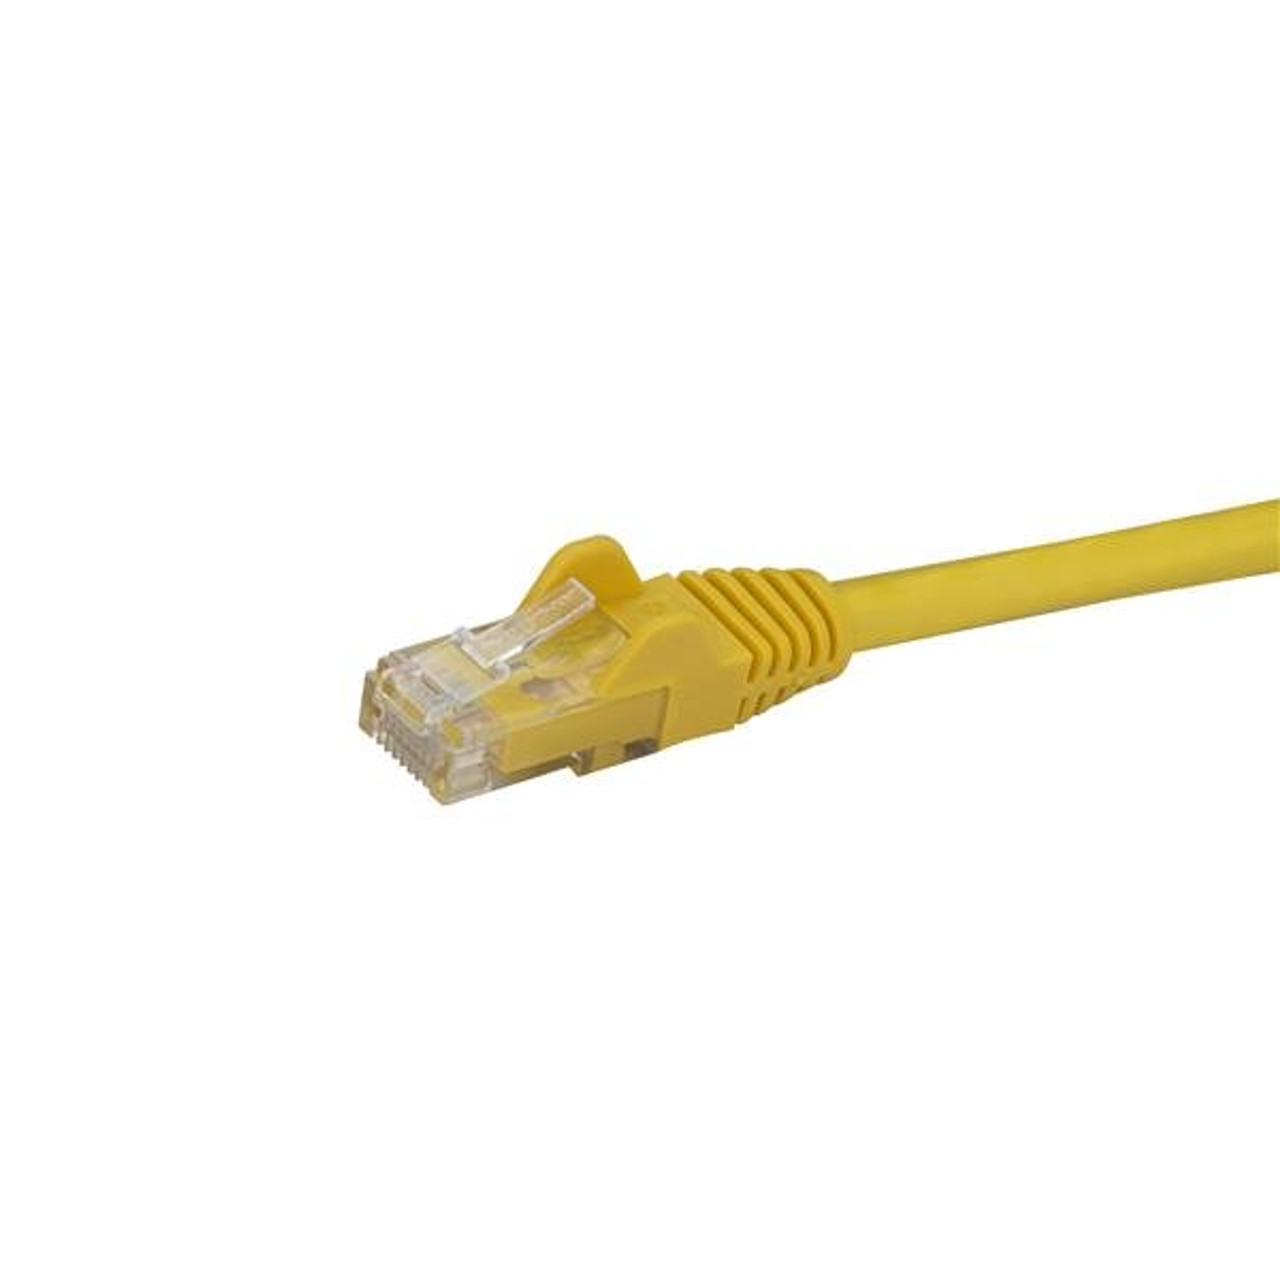 StarTech.com 50cm CAT6 Ethernet Cable - Yellow CAT 6 Gigabit Ethernet Wire -650MHz 100W PoE RJ45 UTP Network/Patch Cord Snagless w/Strain Relief Fluke Tested/Wiring is UL Certified/TIA